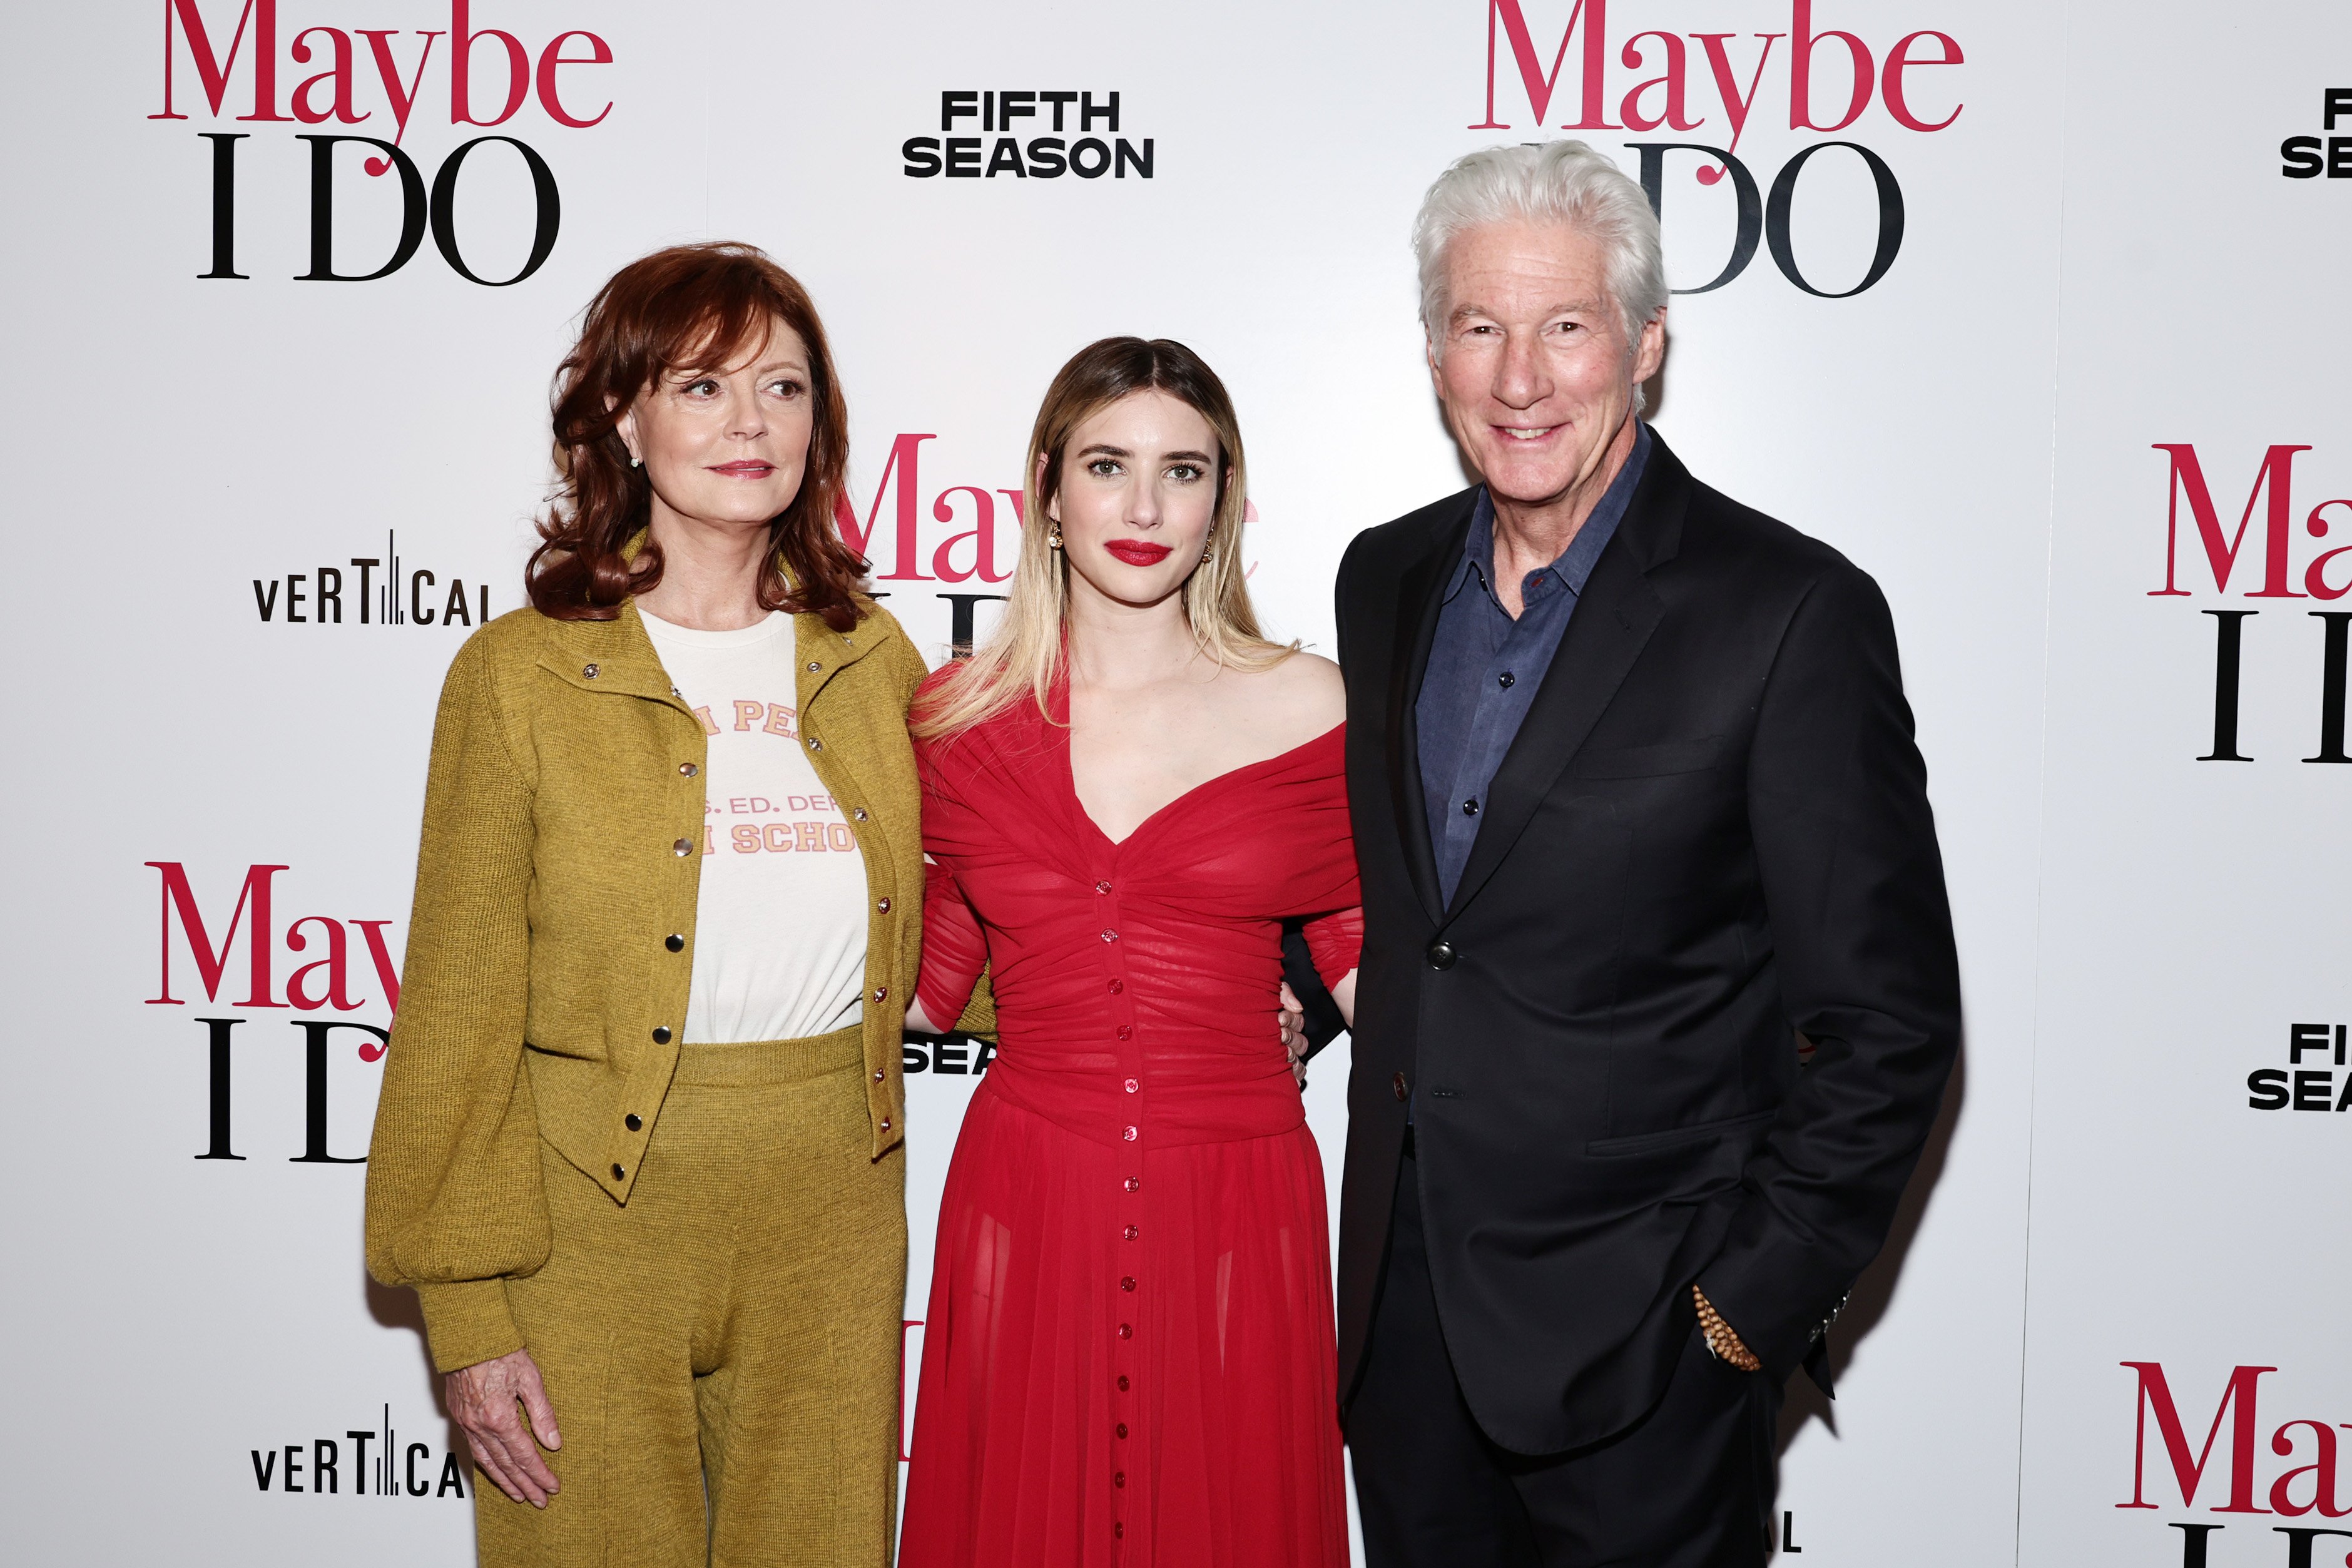 Susan Sarandon, Emma Roberts, and Richard Gere at a special screening of "Maybe I Do" on January 17, 2023, in New York City | Source: Getty Images